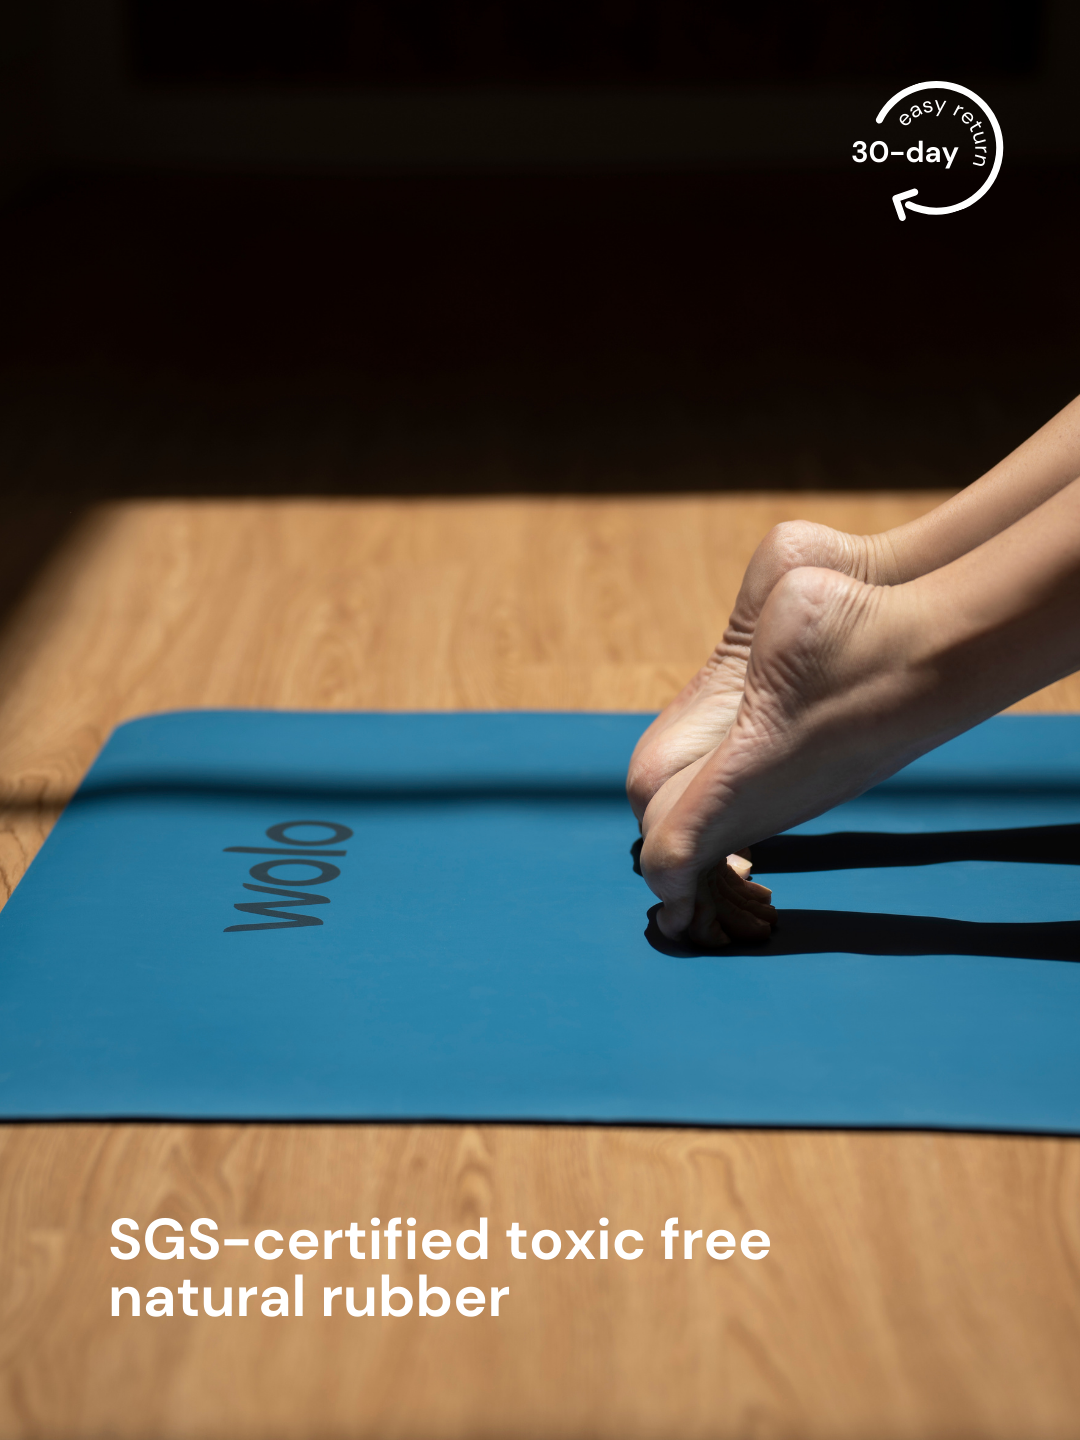 Alaskan blue yoga mat made with SGS-certified natural rubber